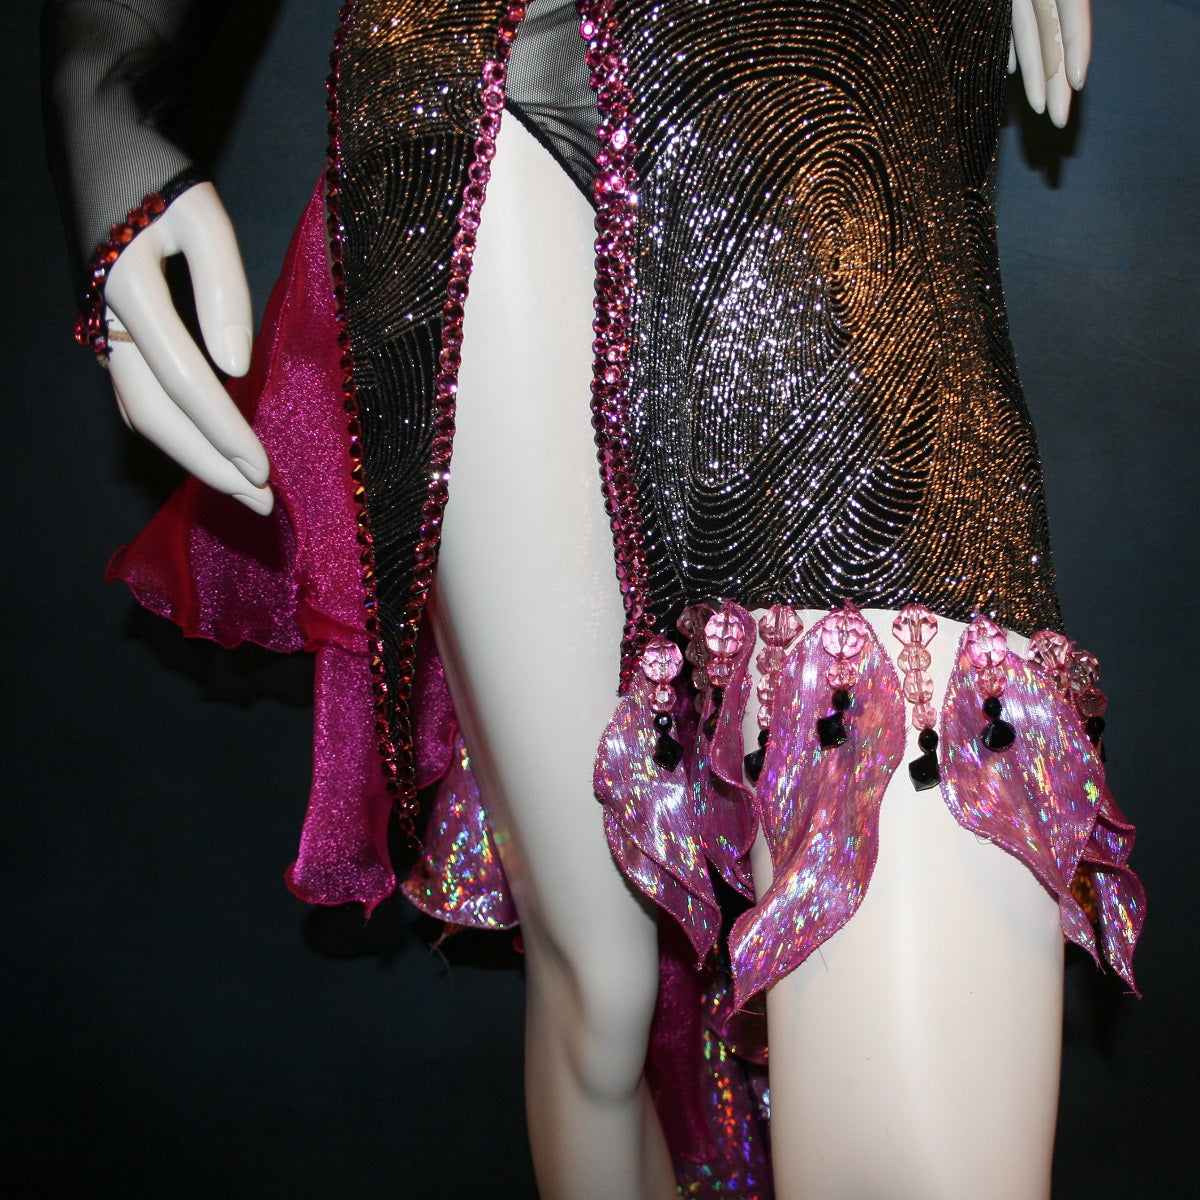 Crystal's Creations bottom front details of Black & silver Latin/rhythm dress with pink accents created of gorgeous silver swirls on black glitter slinky on a sheer stretch mesh base, embellished with pink Swarovski rhinestone work & hand beading